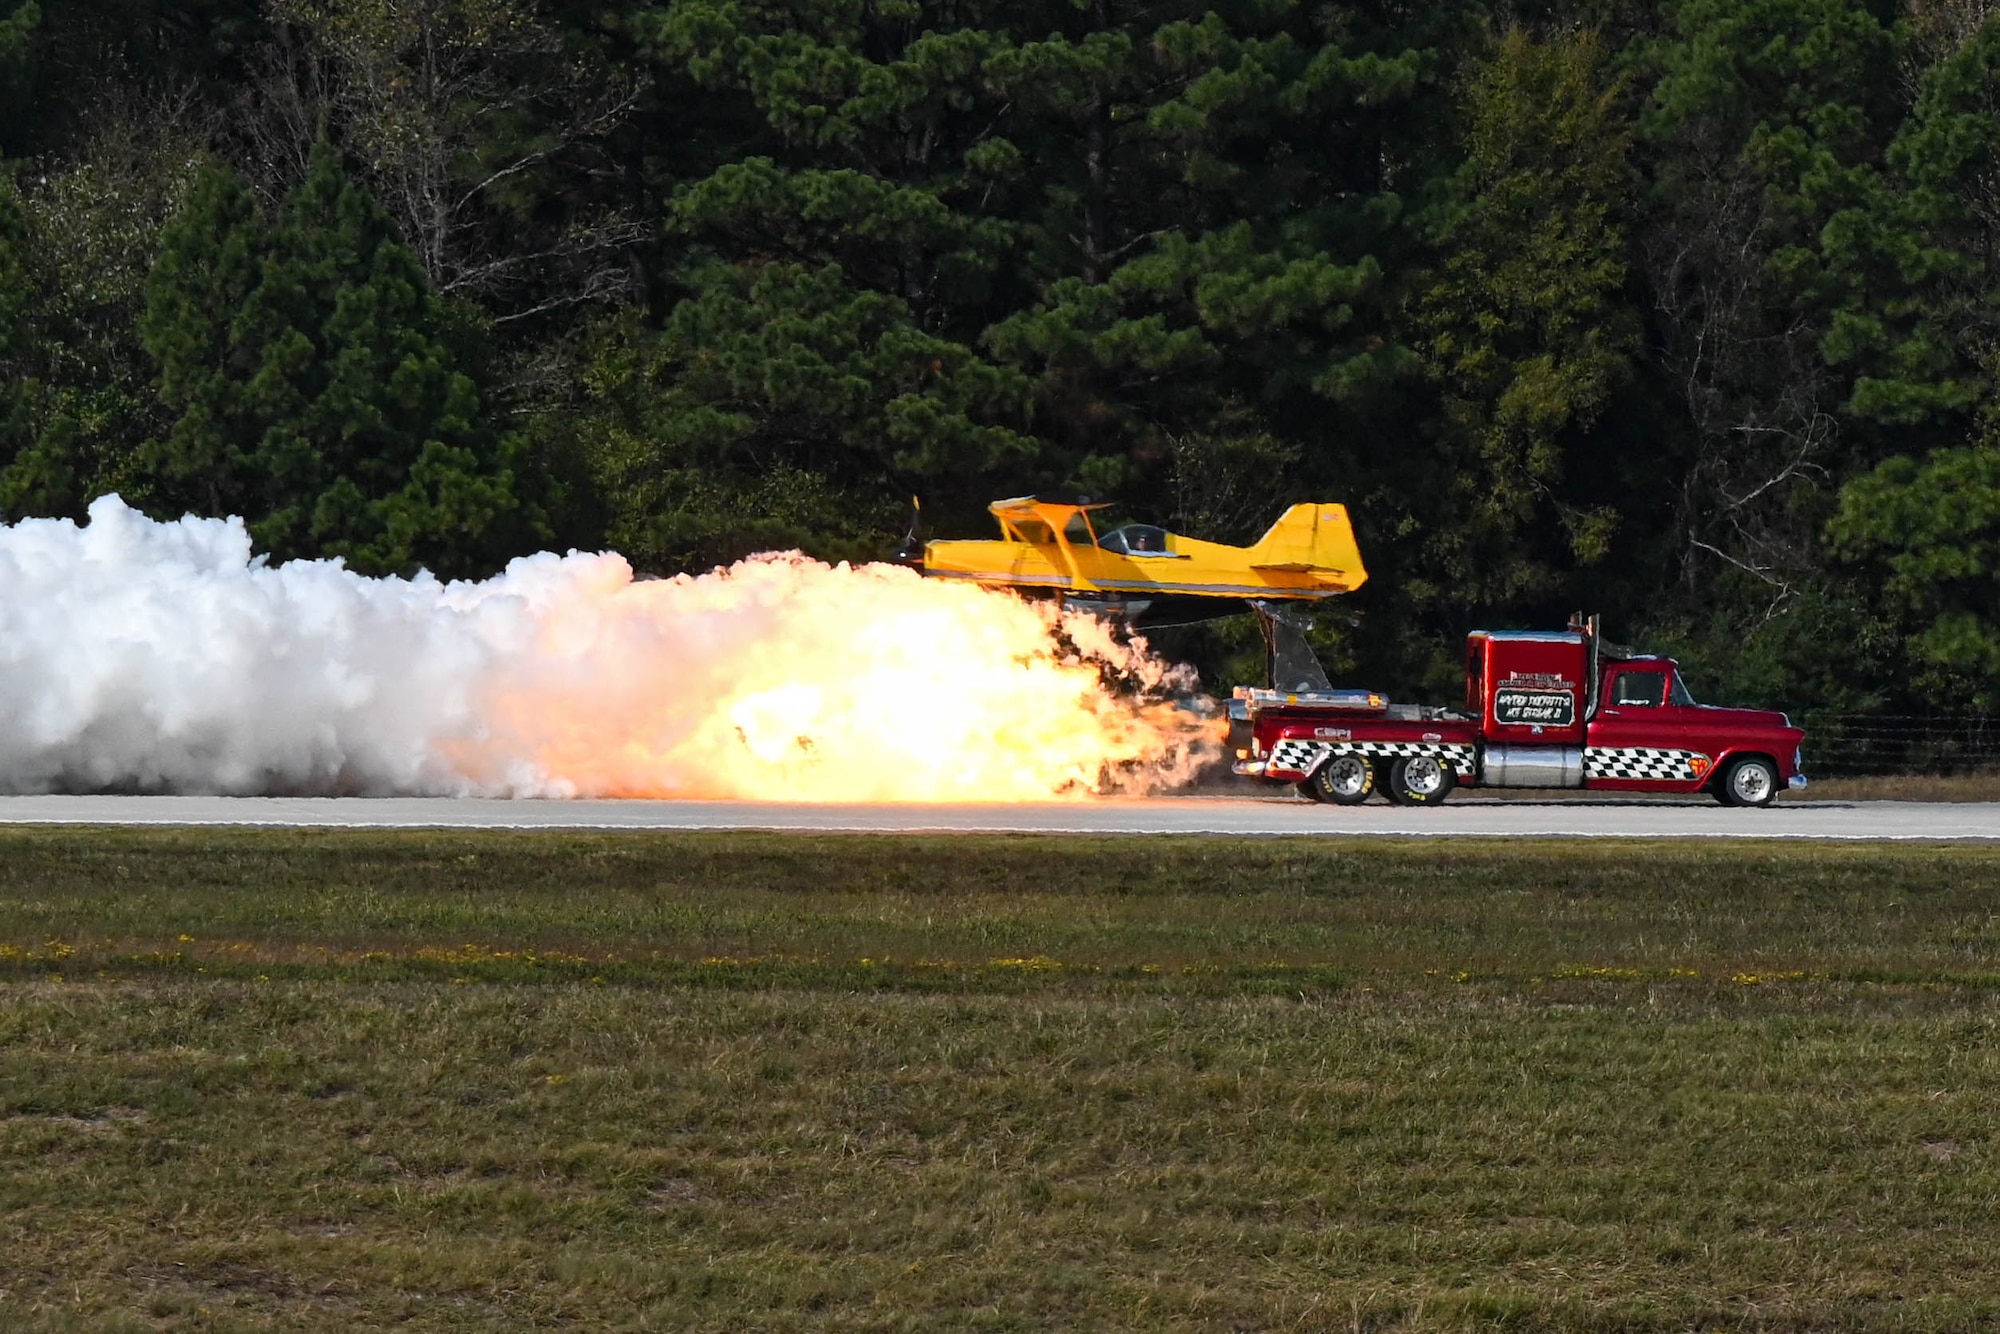 Fire truck with jet engines on runway.